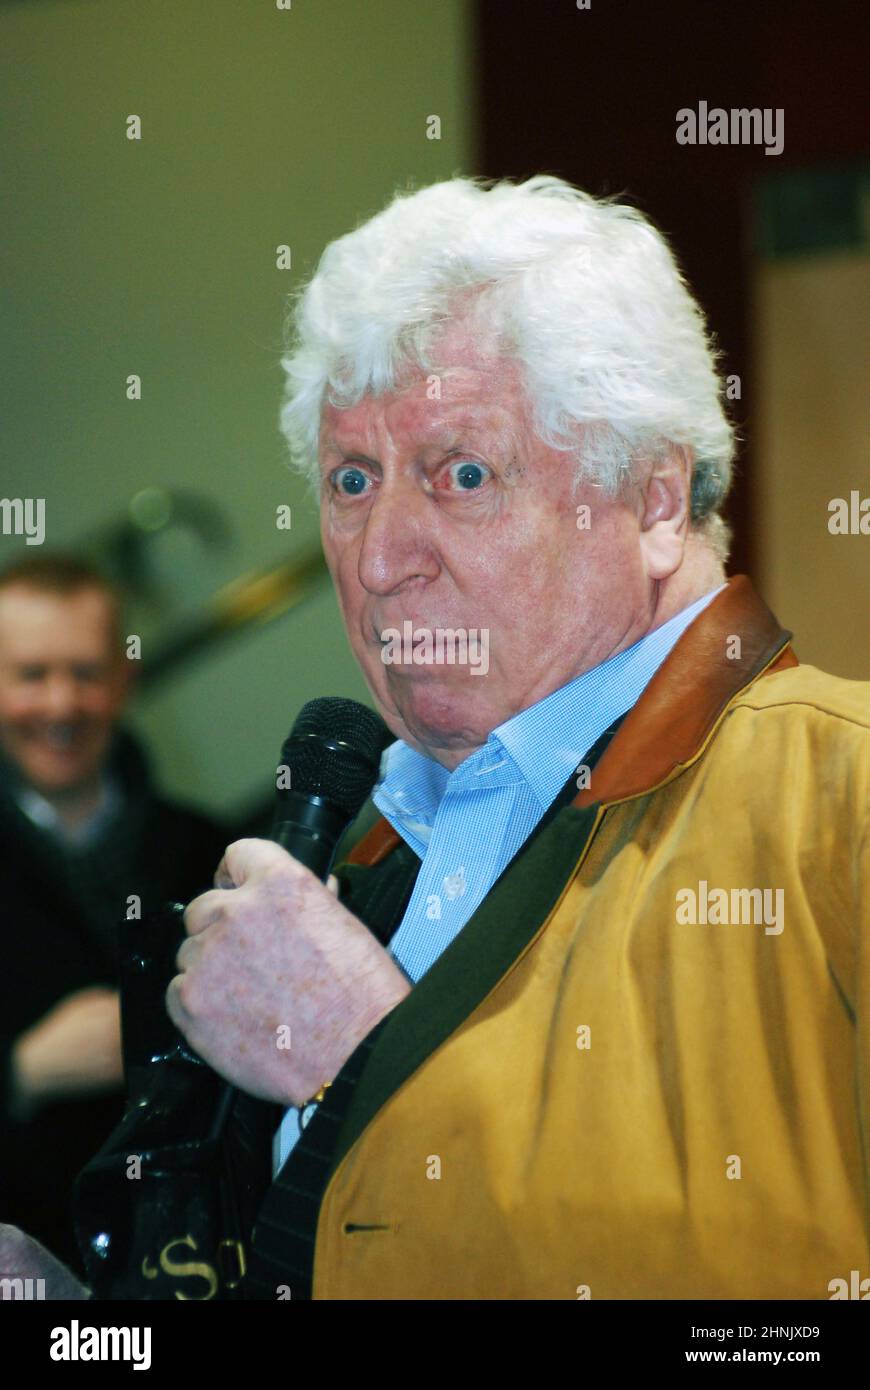 Doctor Who Dr Who, stage, TV, and film actor, Tom Baker, famous for playing the Fourth Doctor. A well-known raconteur, here Tom tells a humerous tale. Stock Photo